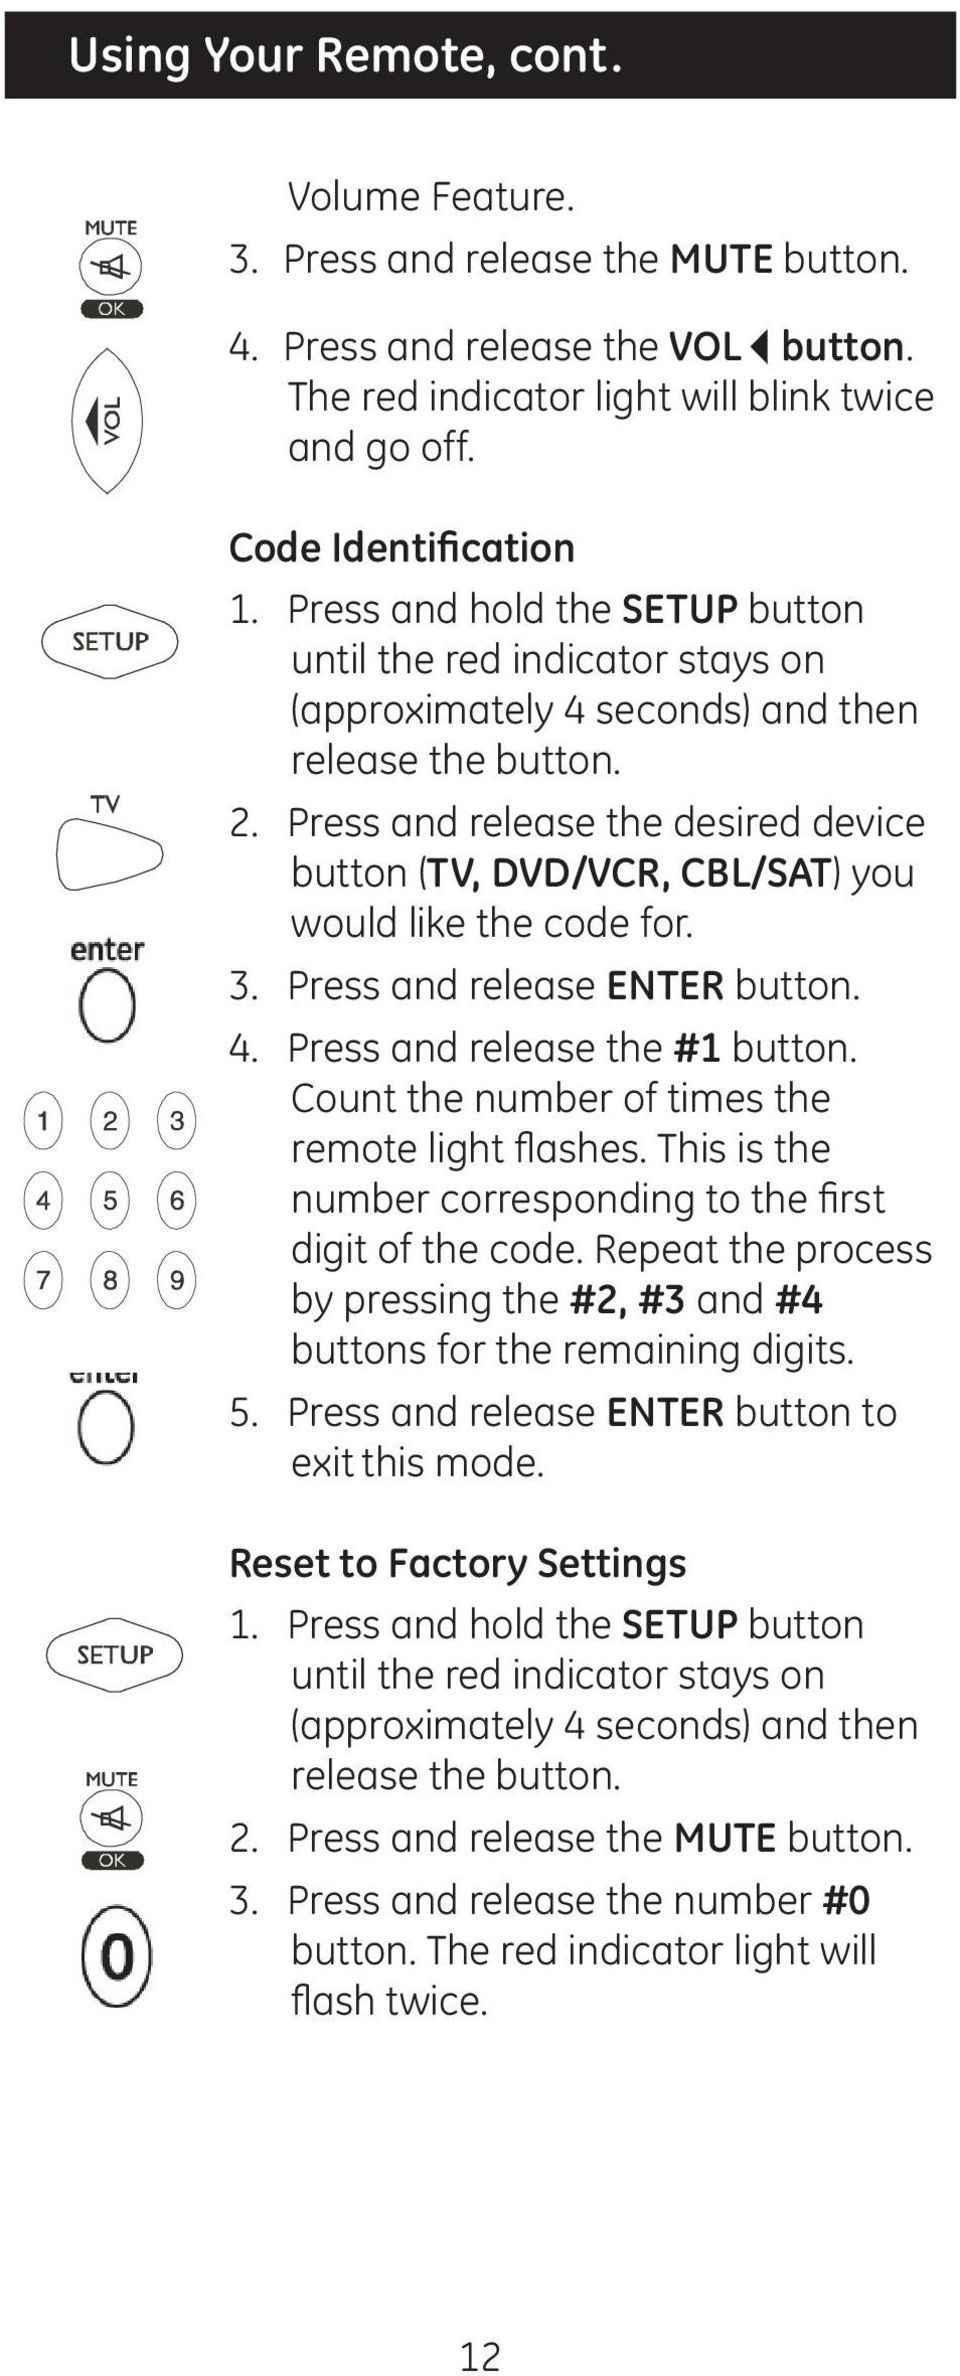 Press and release the desired device button (TV, DVD/VCR, CBL/SAT) you would like the code for. 3. Press and release ENTER button. 4. Press and release the #1 button.